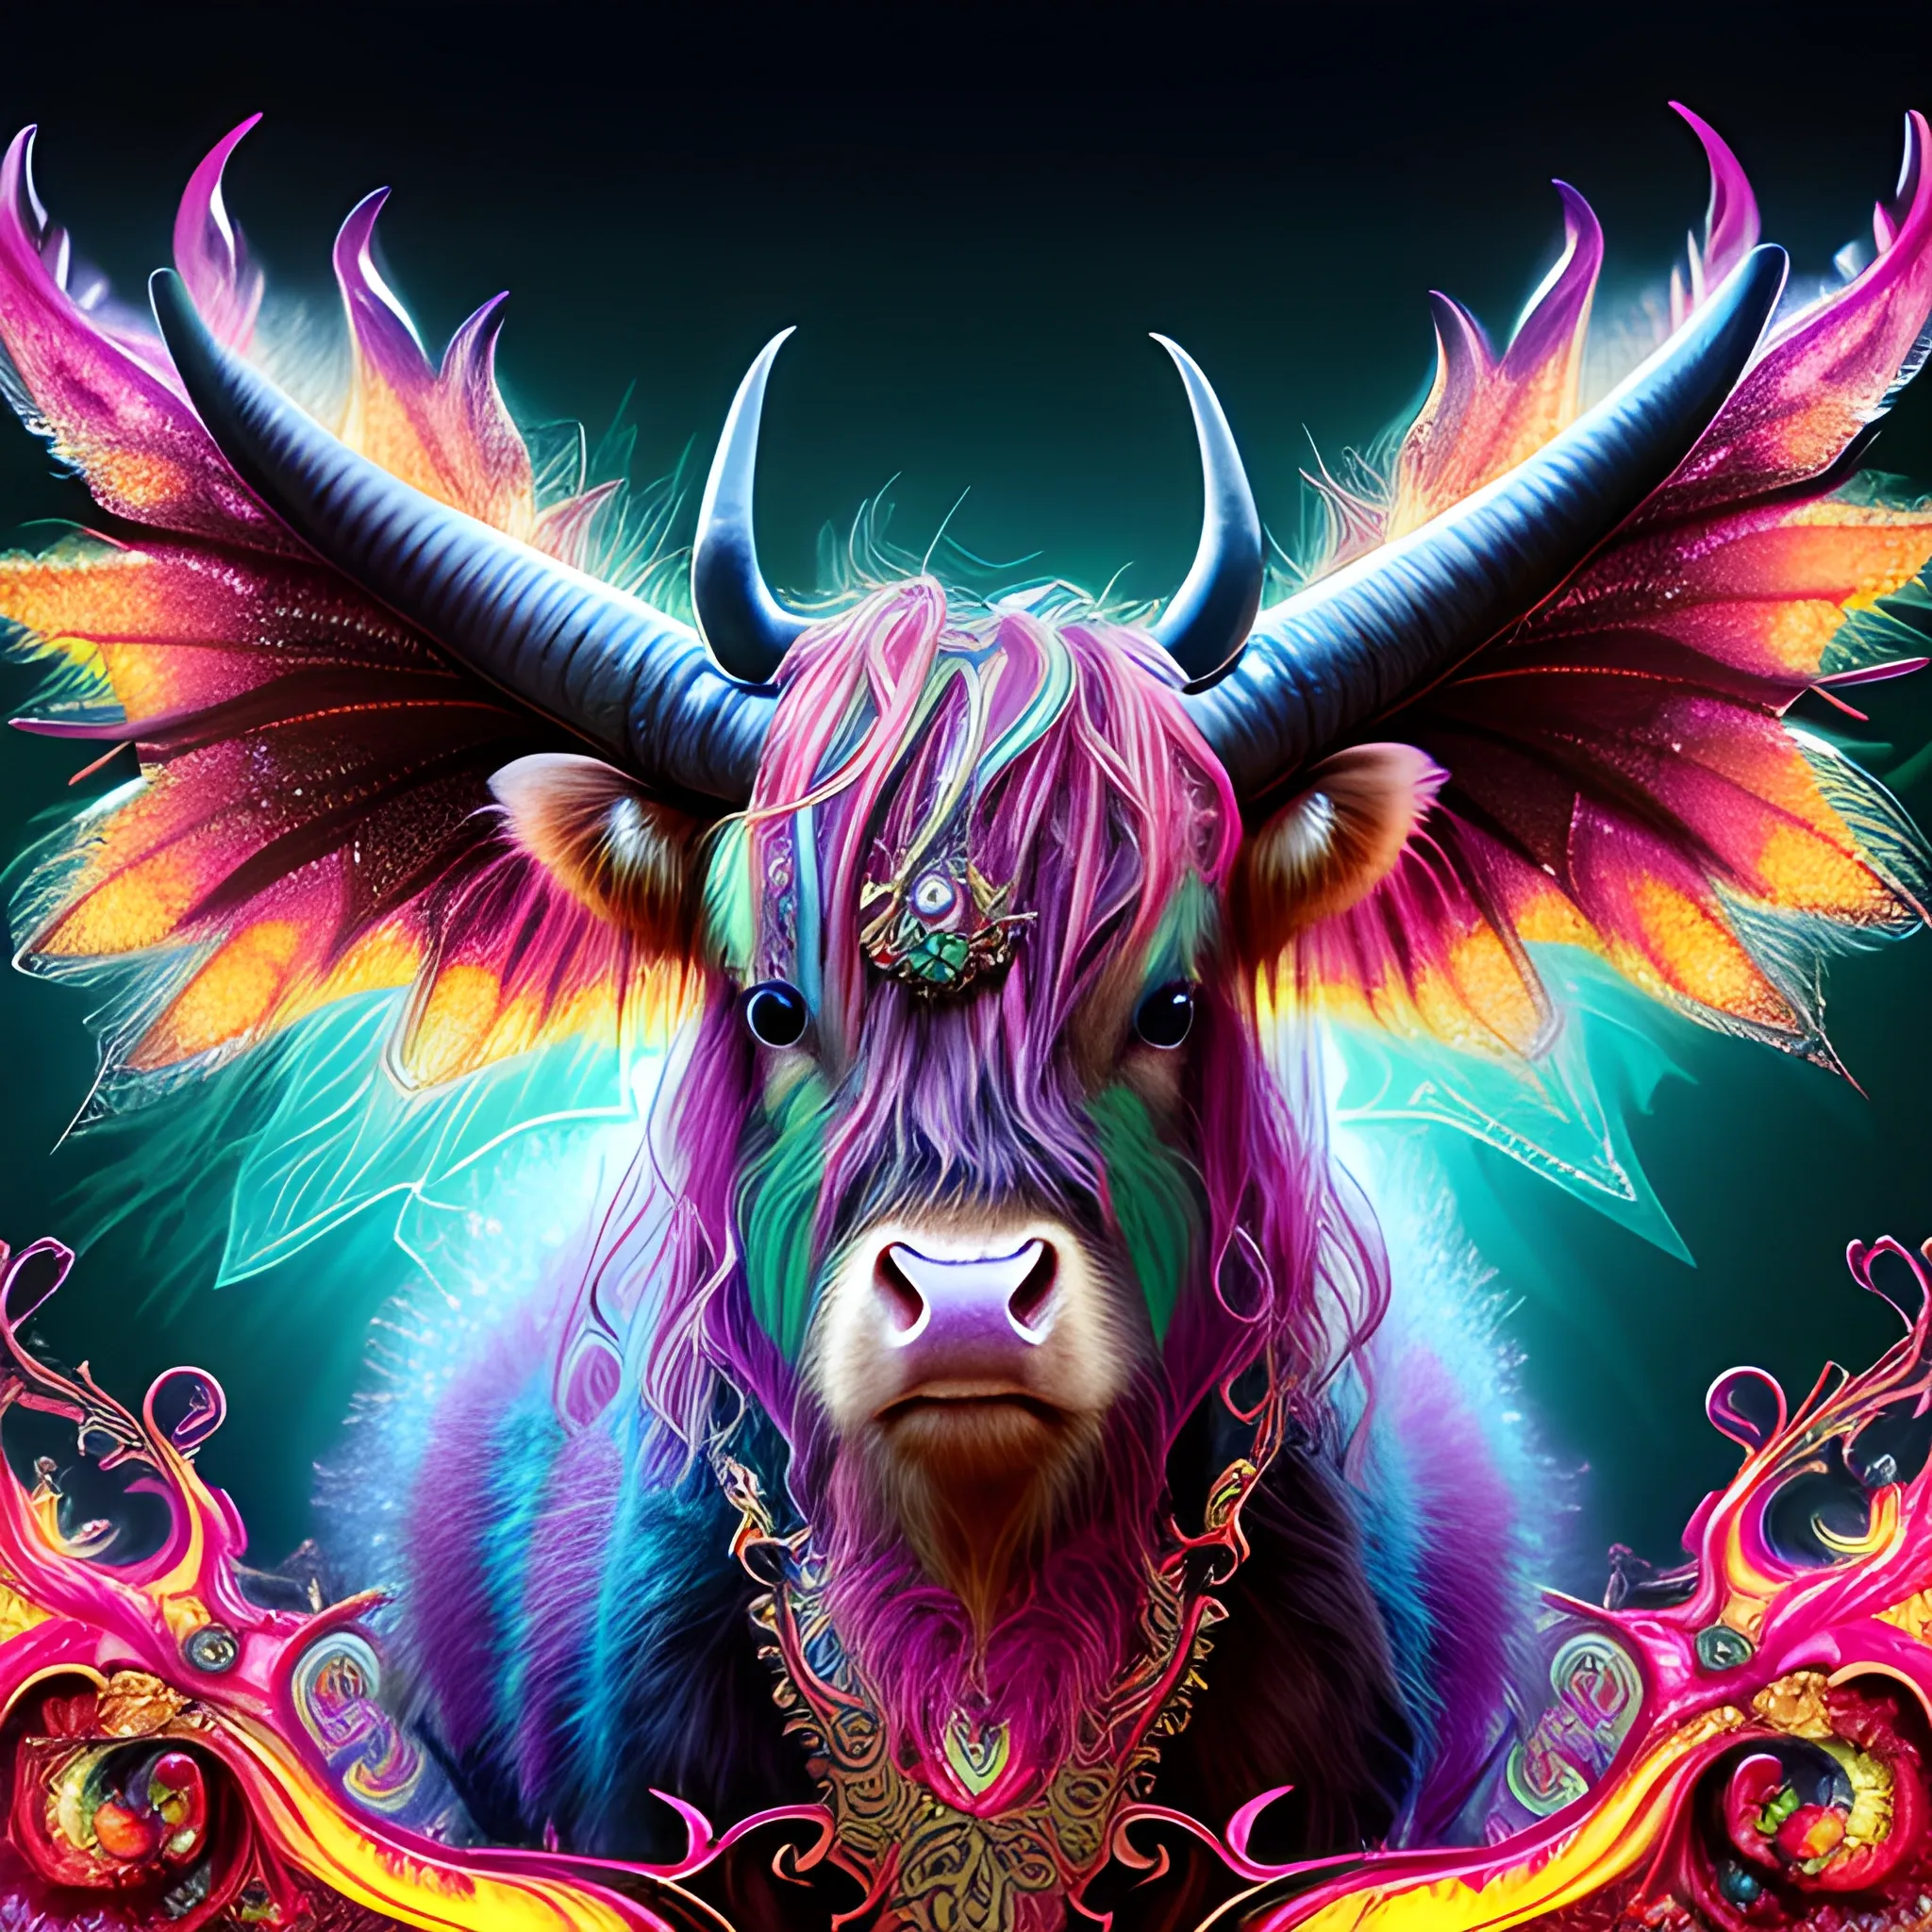 Highland cow, fire psychedelic, cute eyes, dragon wings, bear claws, peacock feathers, filigree laser fractal details, glistening shiny scales, intricate ornate hypermaximalist sharp focus, dramatic lighting, highly detailed and intricate, hyper maximalist, ornate, photographic style, luxury, elite, haunting matte painting, cinematic, Trippy